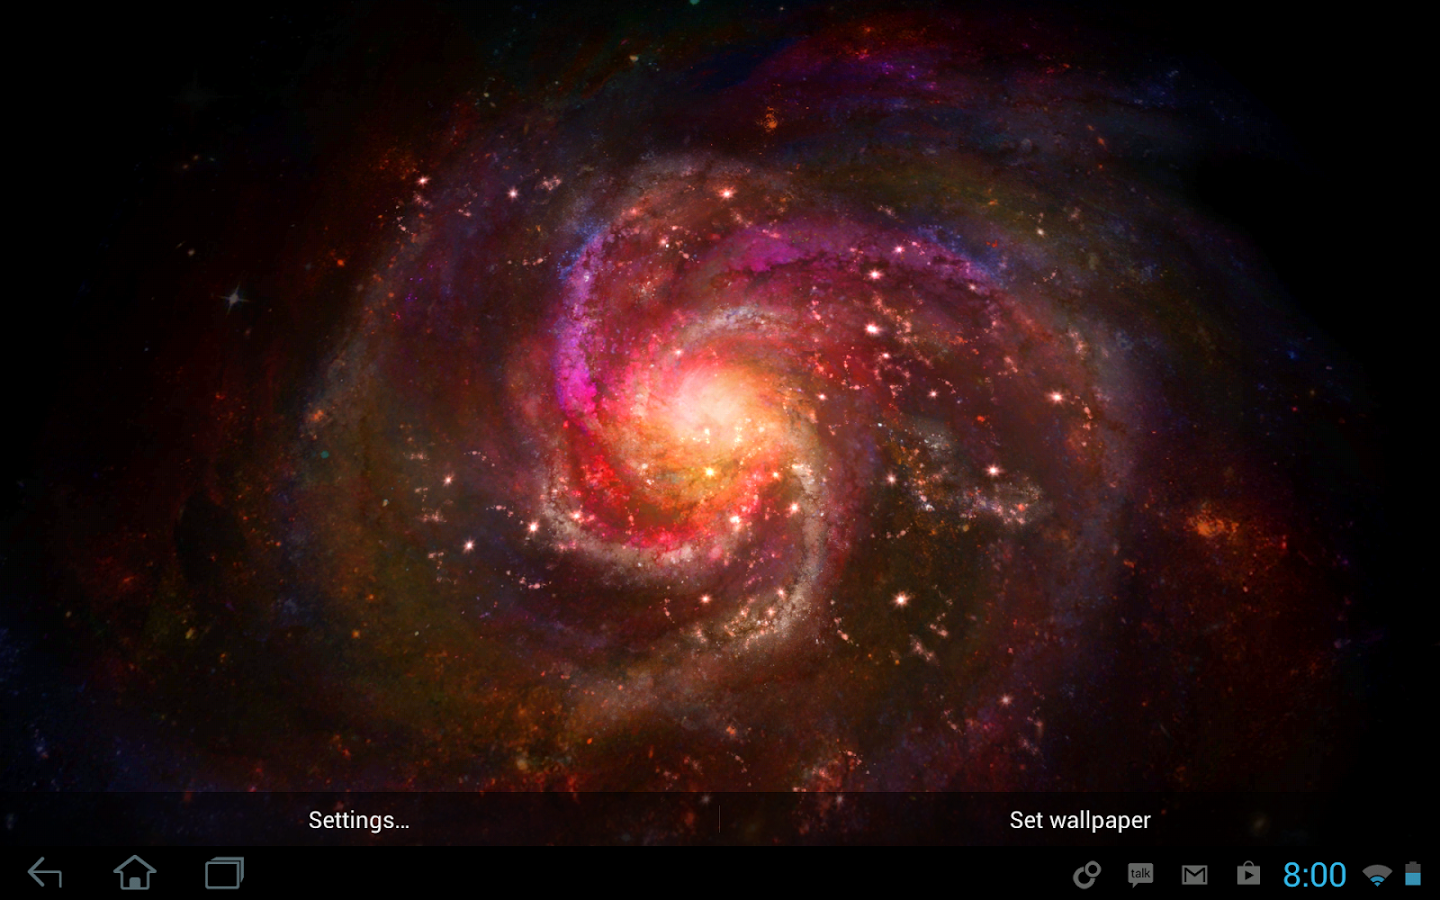 Stunning Live Wallpaper Featuring A Spinning Spiral Galaxy Galactic